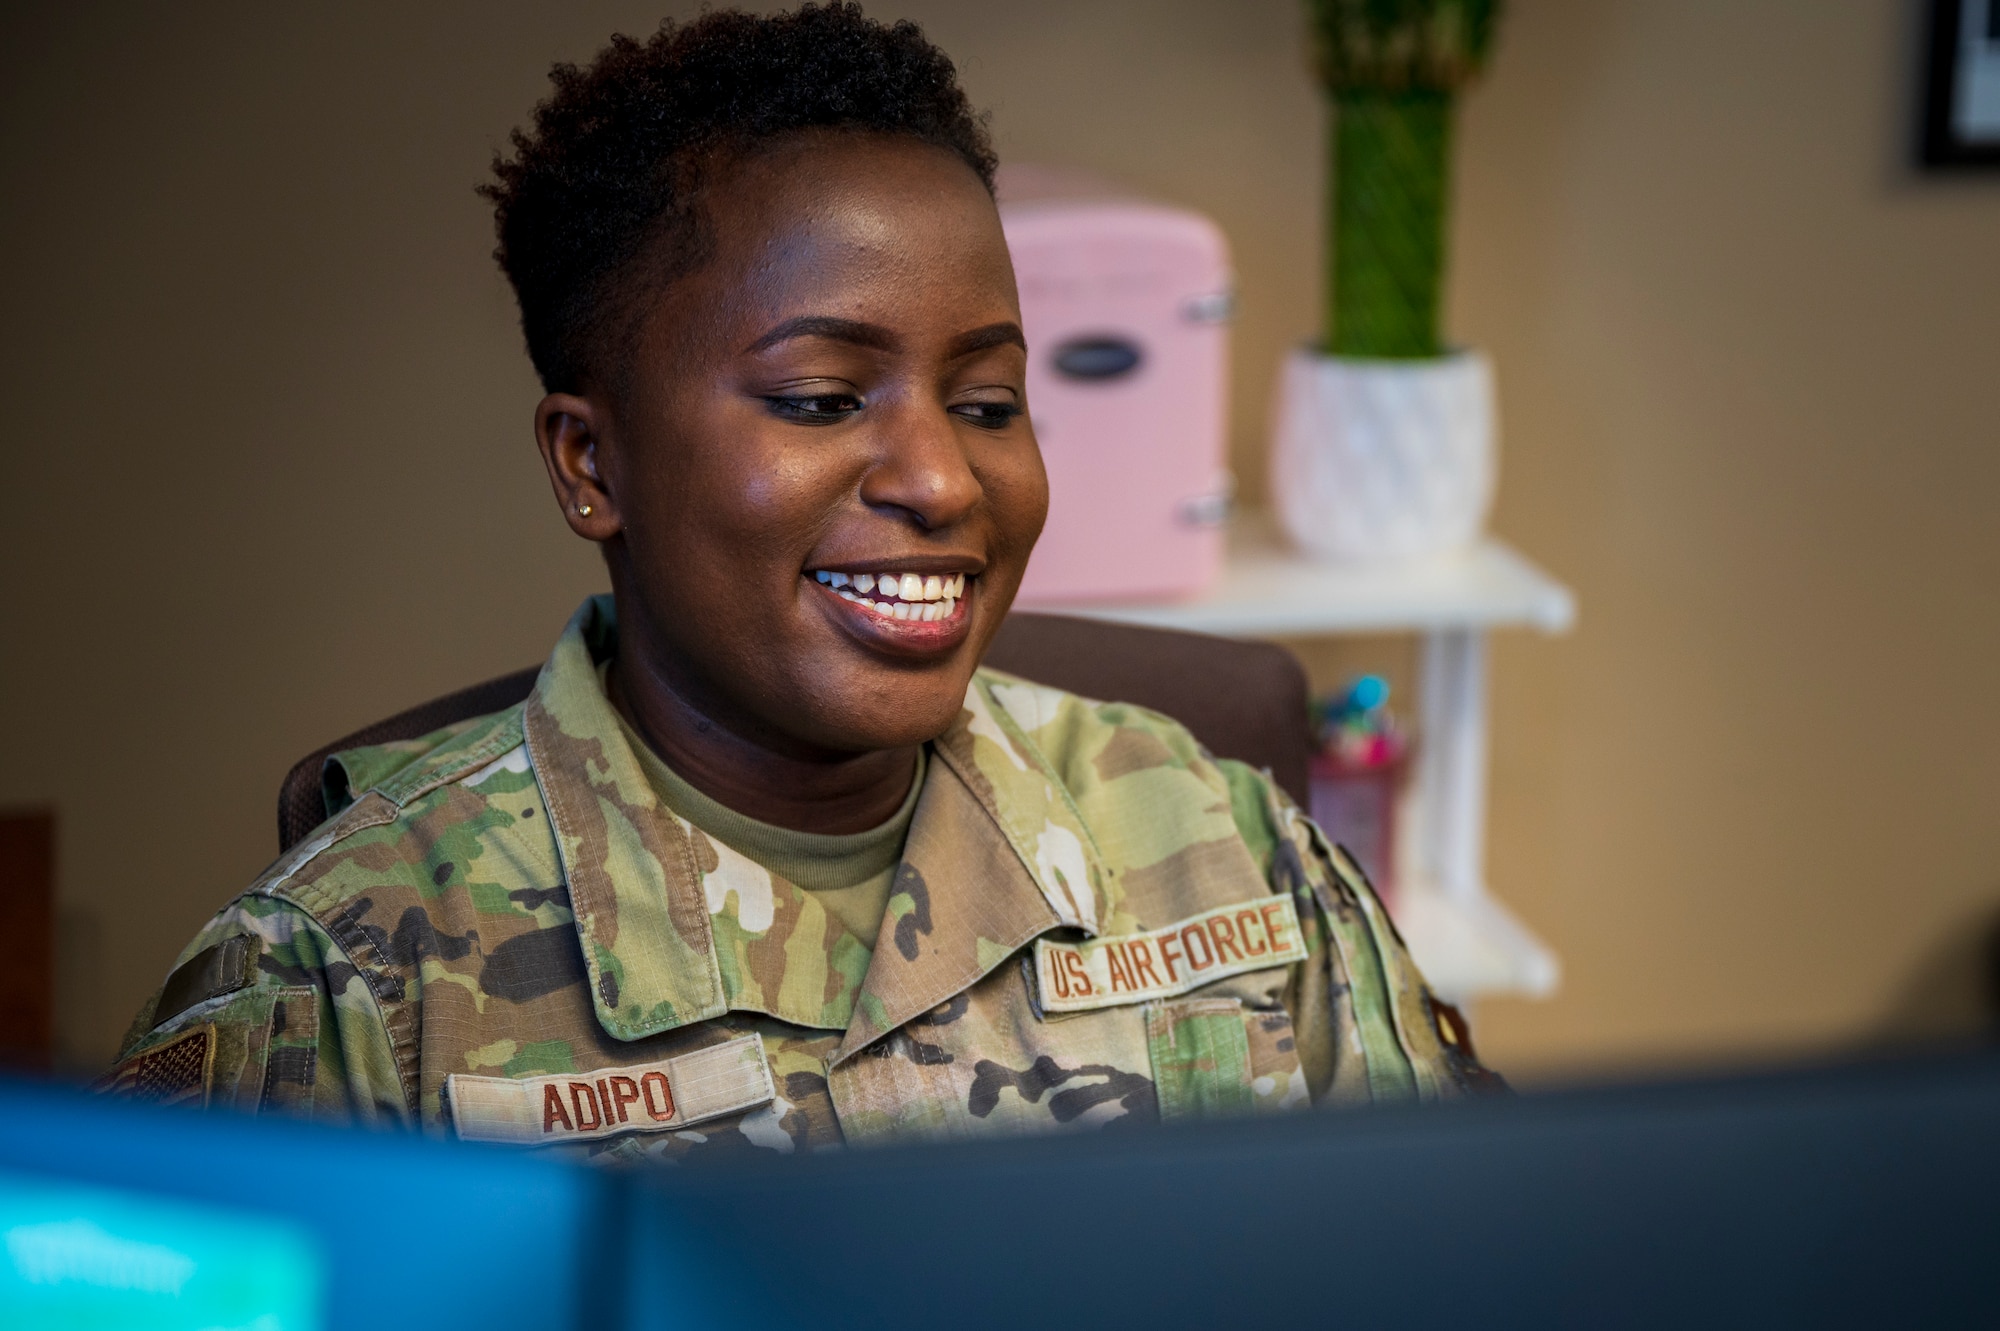 U.S. Air Force Staff Sgt. Winnie Adipo, 56th Medical Group noncommissioned officer in charge of personnel administration, processes documents in her office, at Luke Air Force Base, Jan. 17, 2023.